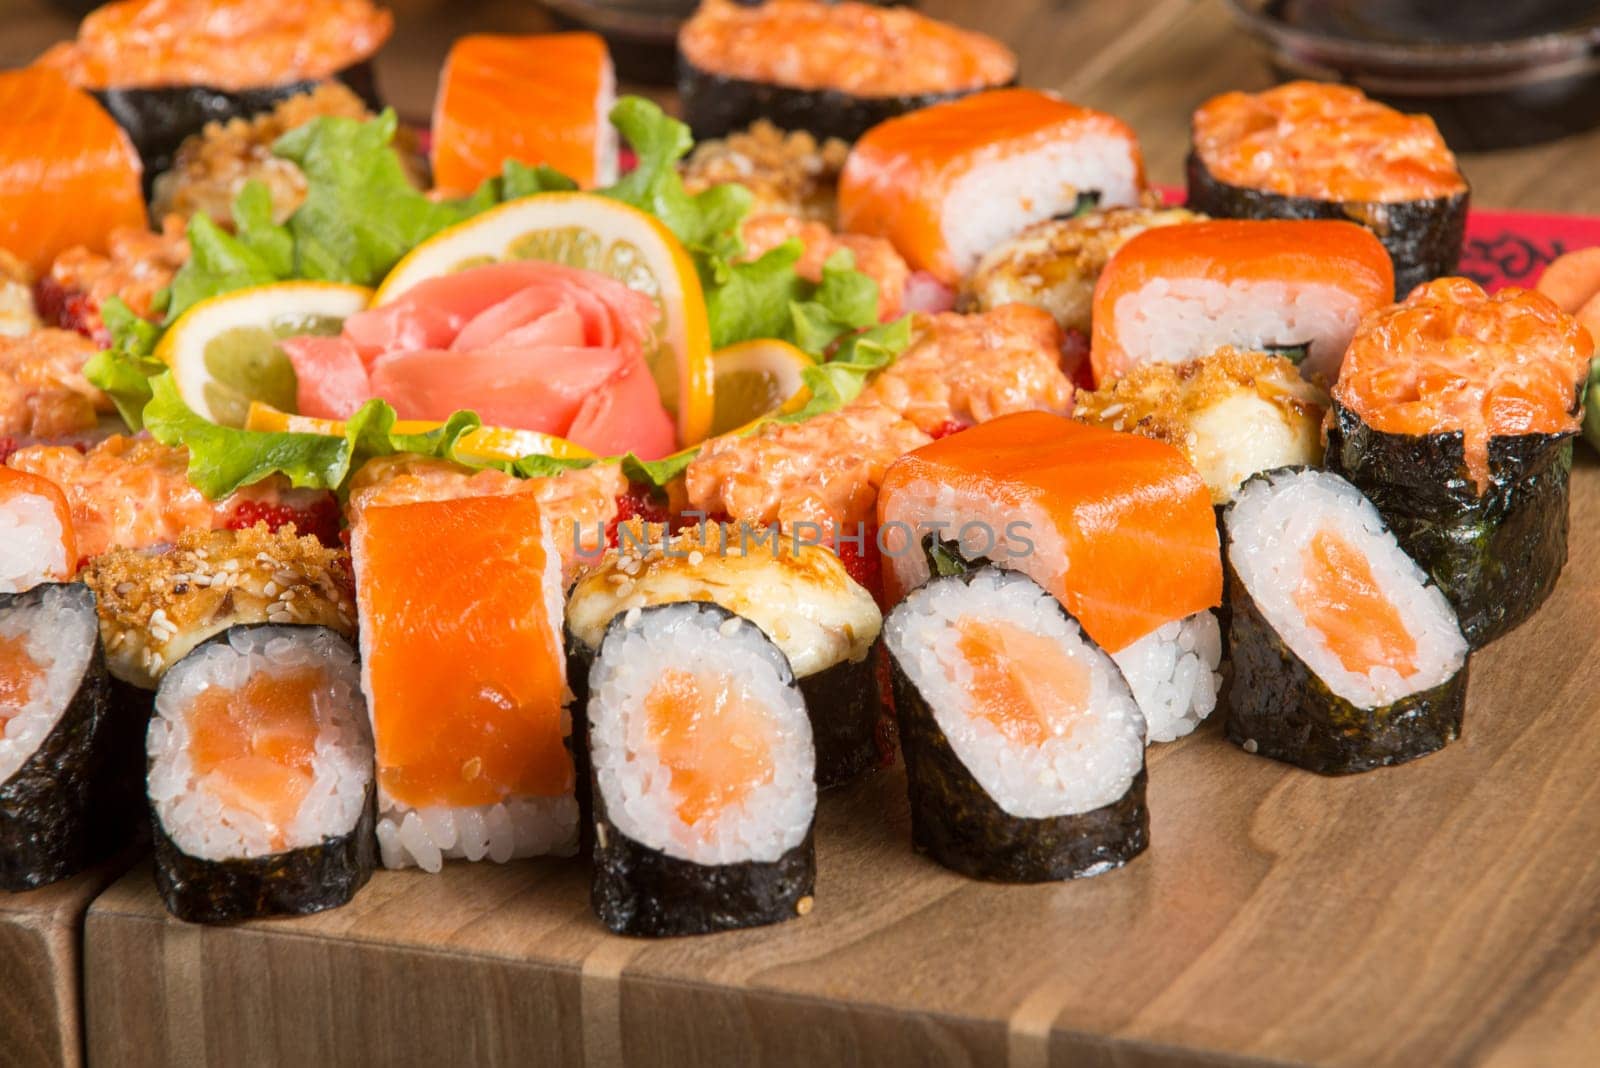 A closeup shot of a sushi set on a wooden plate